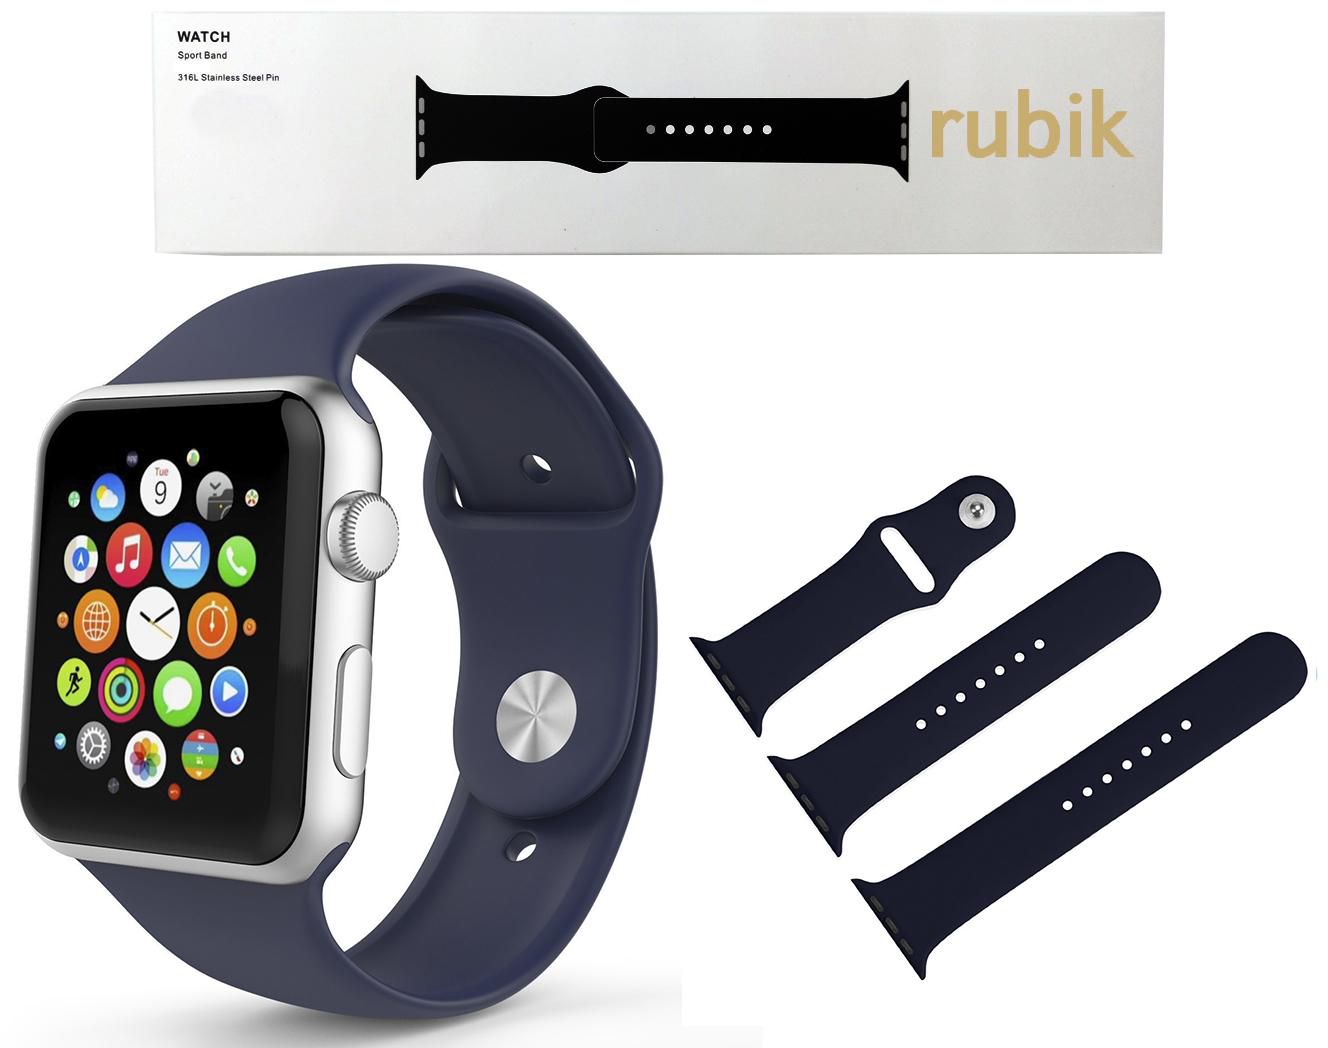 Rubik Silicone Rubber Sport Band for Apple Watch 1st Gen - Midnight Blue